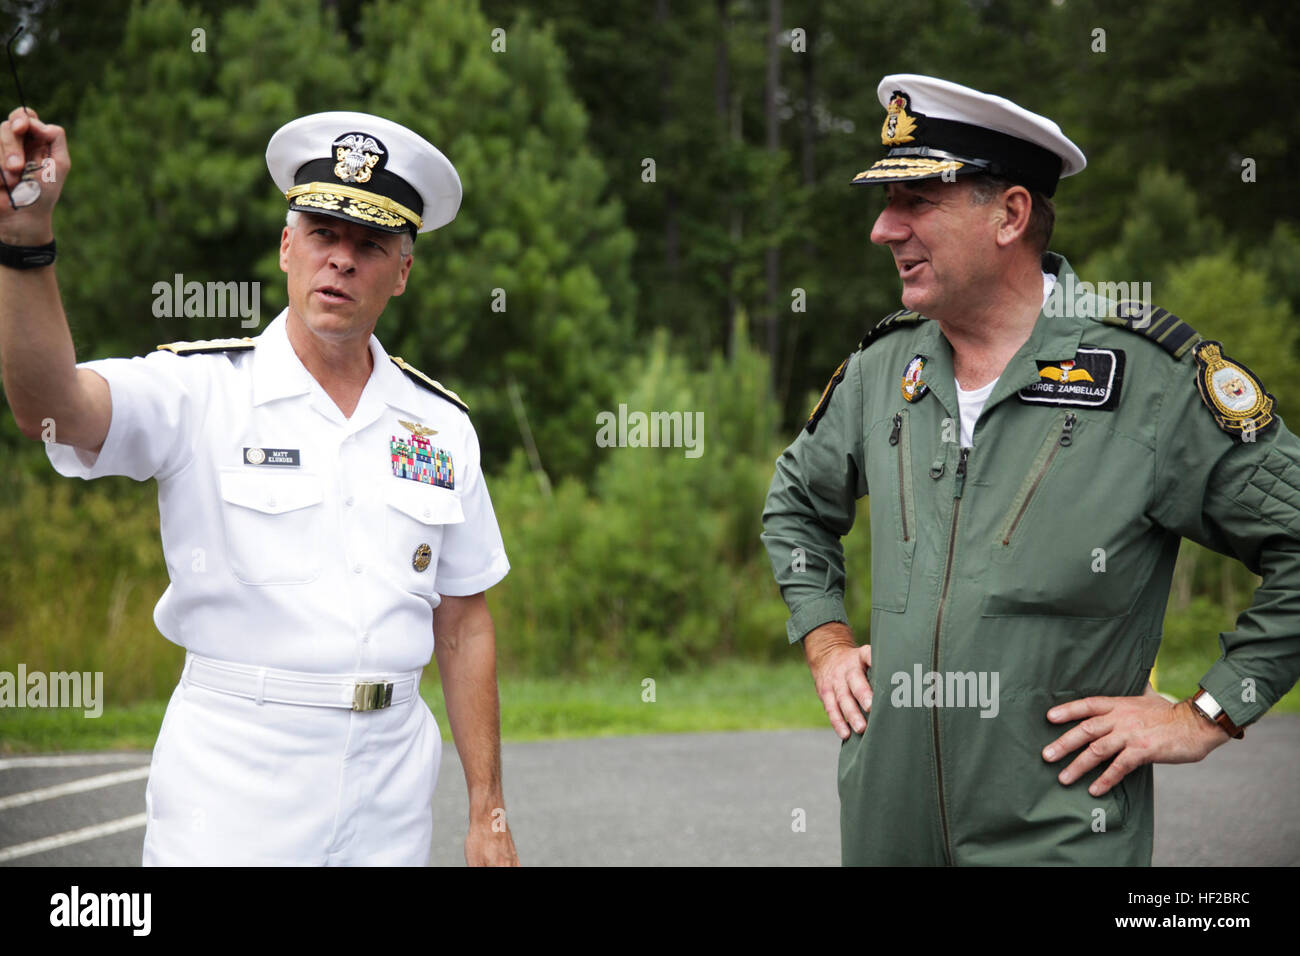 The First Sea Lord and Chief of Naval Staff of the British Royal Navy, Adm. Sir George Zambellas, right, speaks with U.S. Navy Rear Adm. Matthew L. Klunder after arriving at Naval Surface Warfare Center at Dahlgren, Va., July 29, 2014. Zambellas is taking part in the Commandant of the Marine Corps' Counterpart Program, which invites foreign military leaders to visit the United States and interact with U.S. military leaders. (U.S. Marine Corps photo by Cpl. Michael C. Guinto/Released) First Sea Lord Counterpart Visit 140729-M-LI307-437 Stock Photo